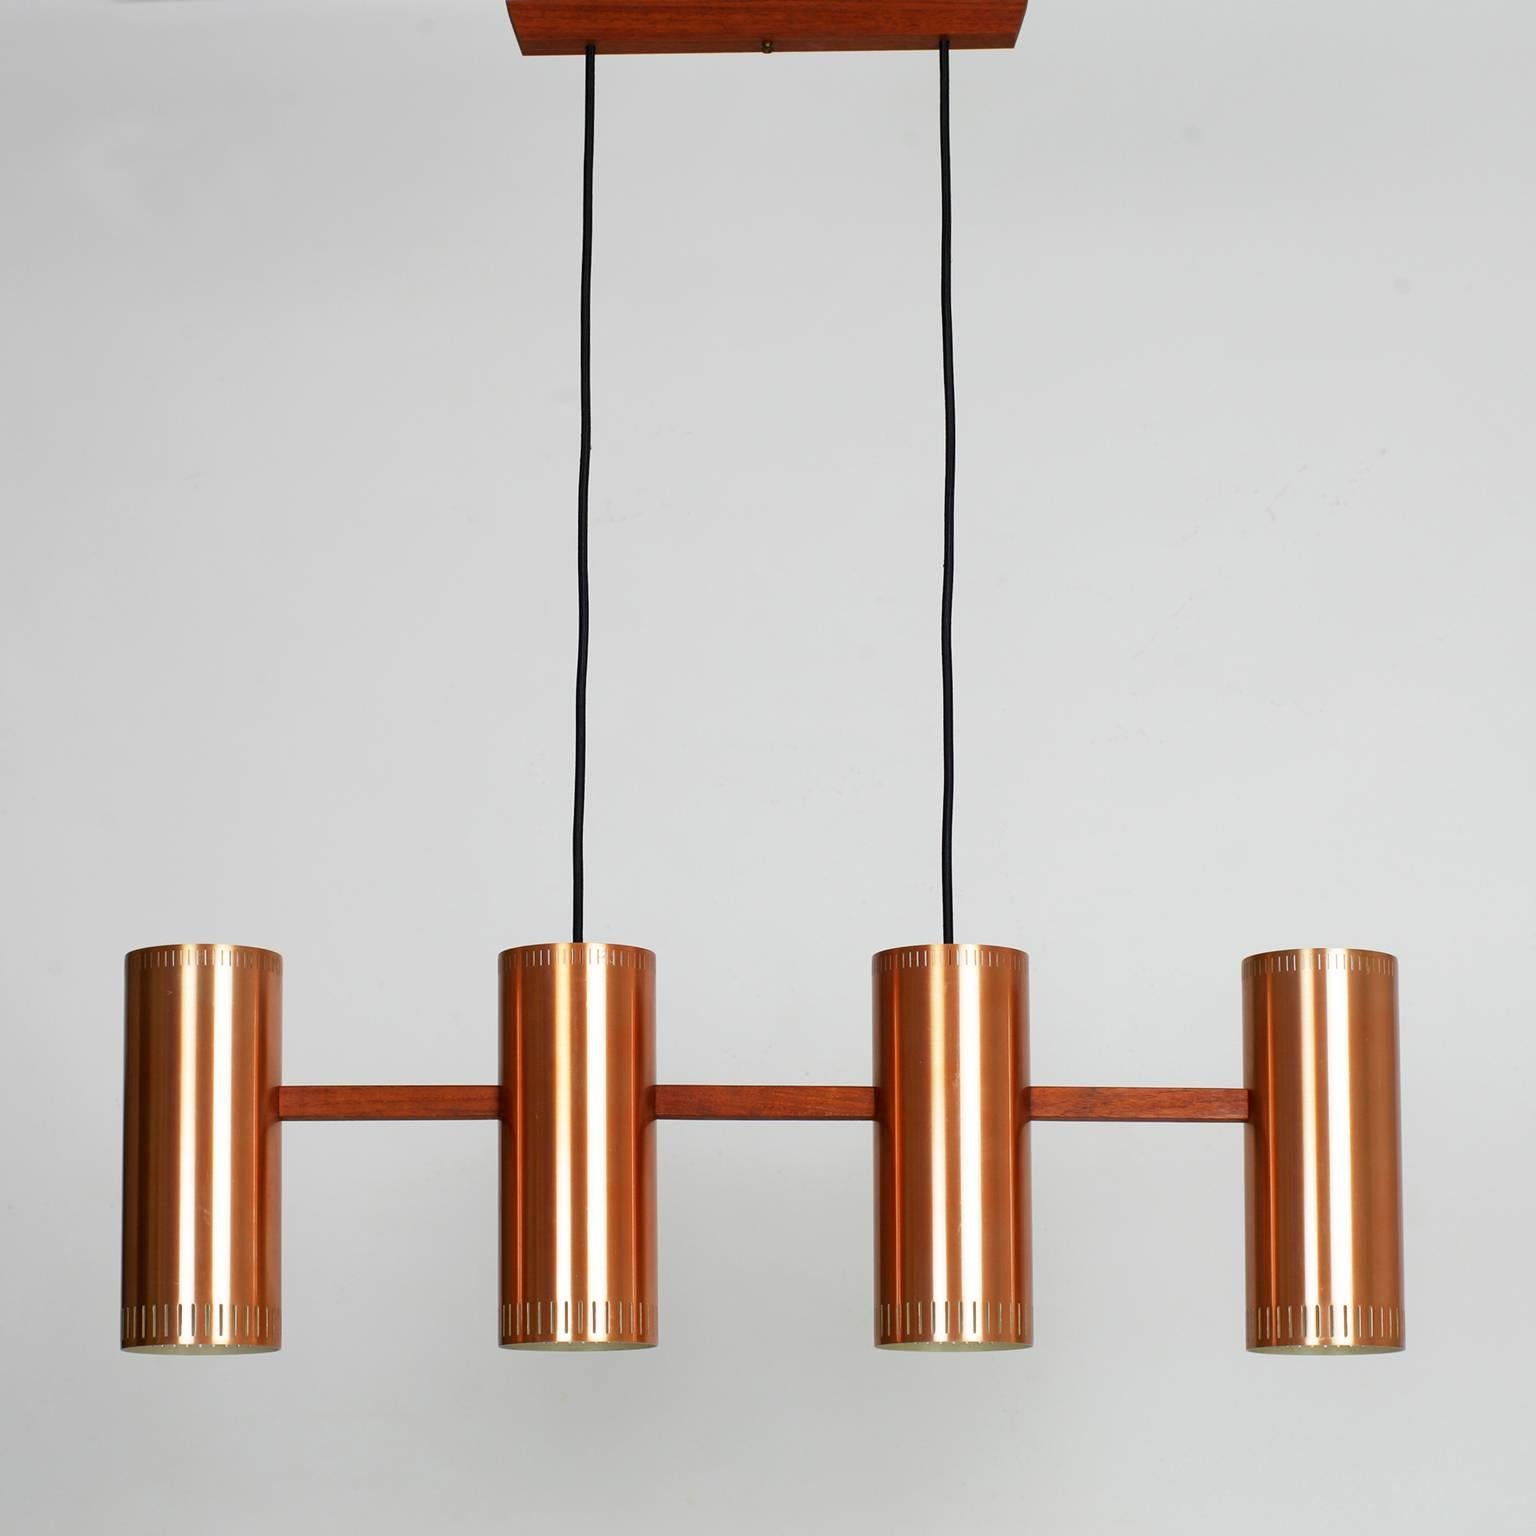 Rare cylinder IV copper and teak pendant designed by Jo Hammerborg in the mid-1960s and produced by Fog & Mørup. 
Four E27 bulbs (one by cylinder) 
Rewired with new black fabric cord.
Very good condition.